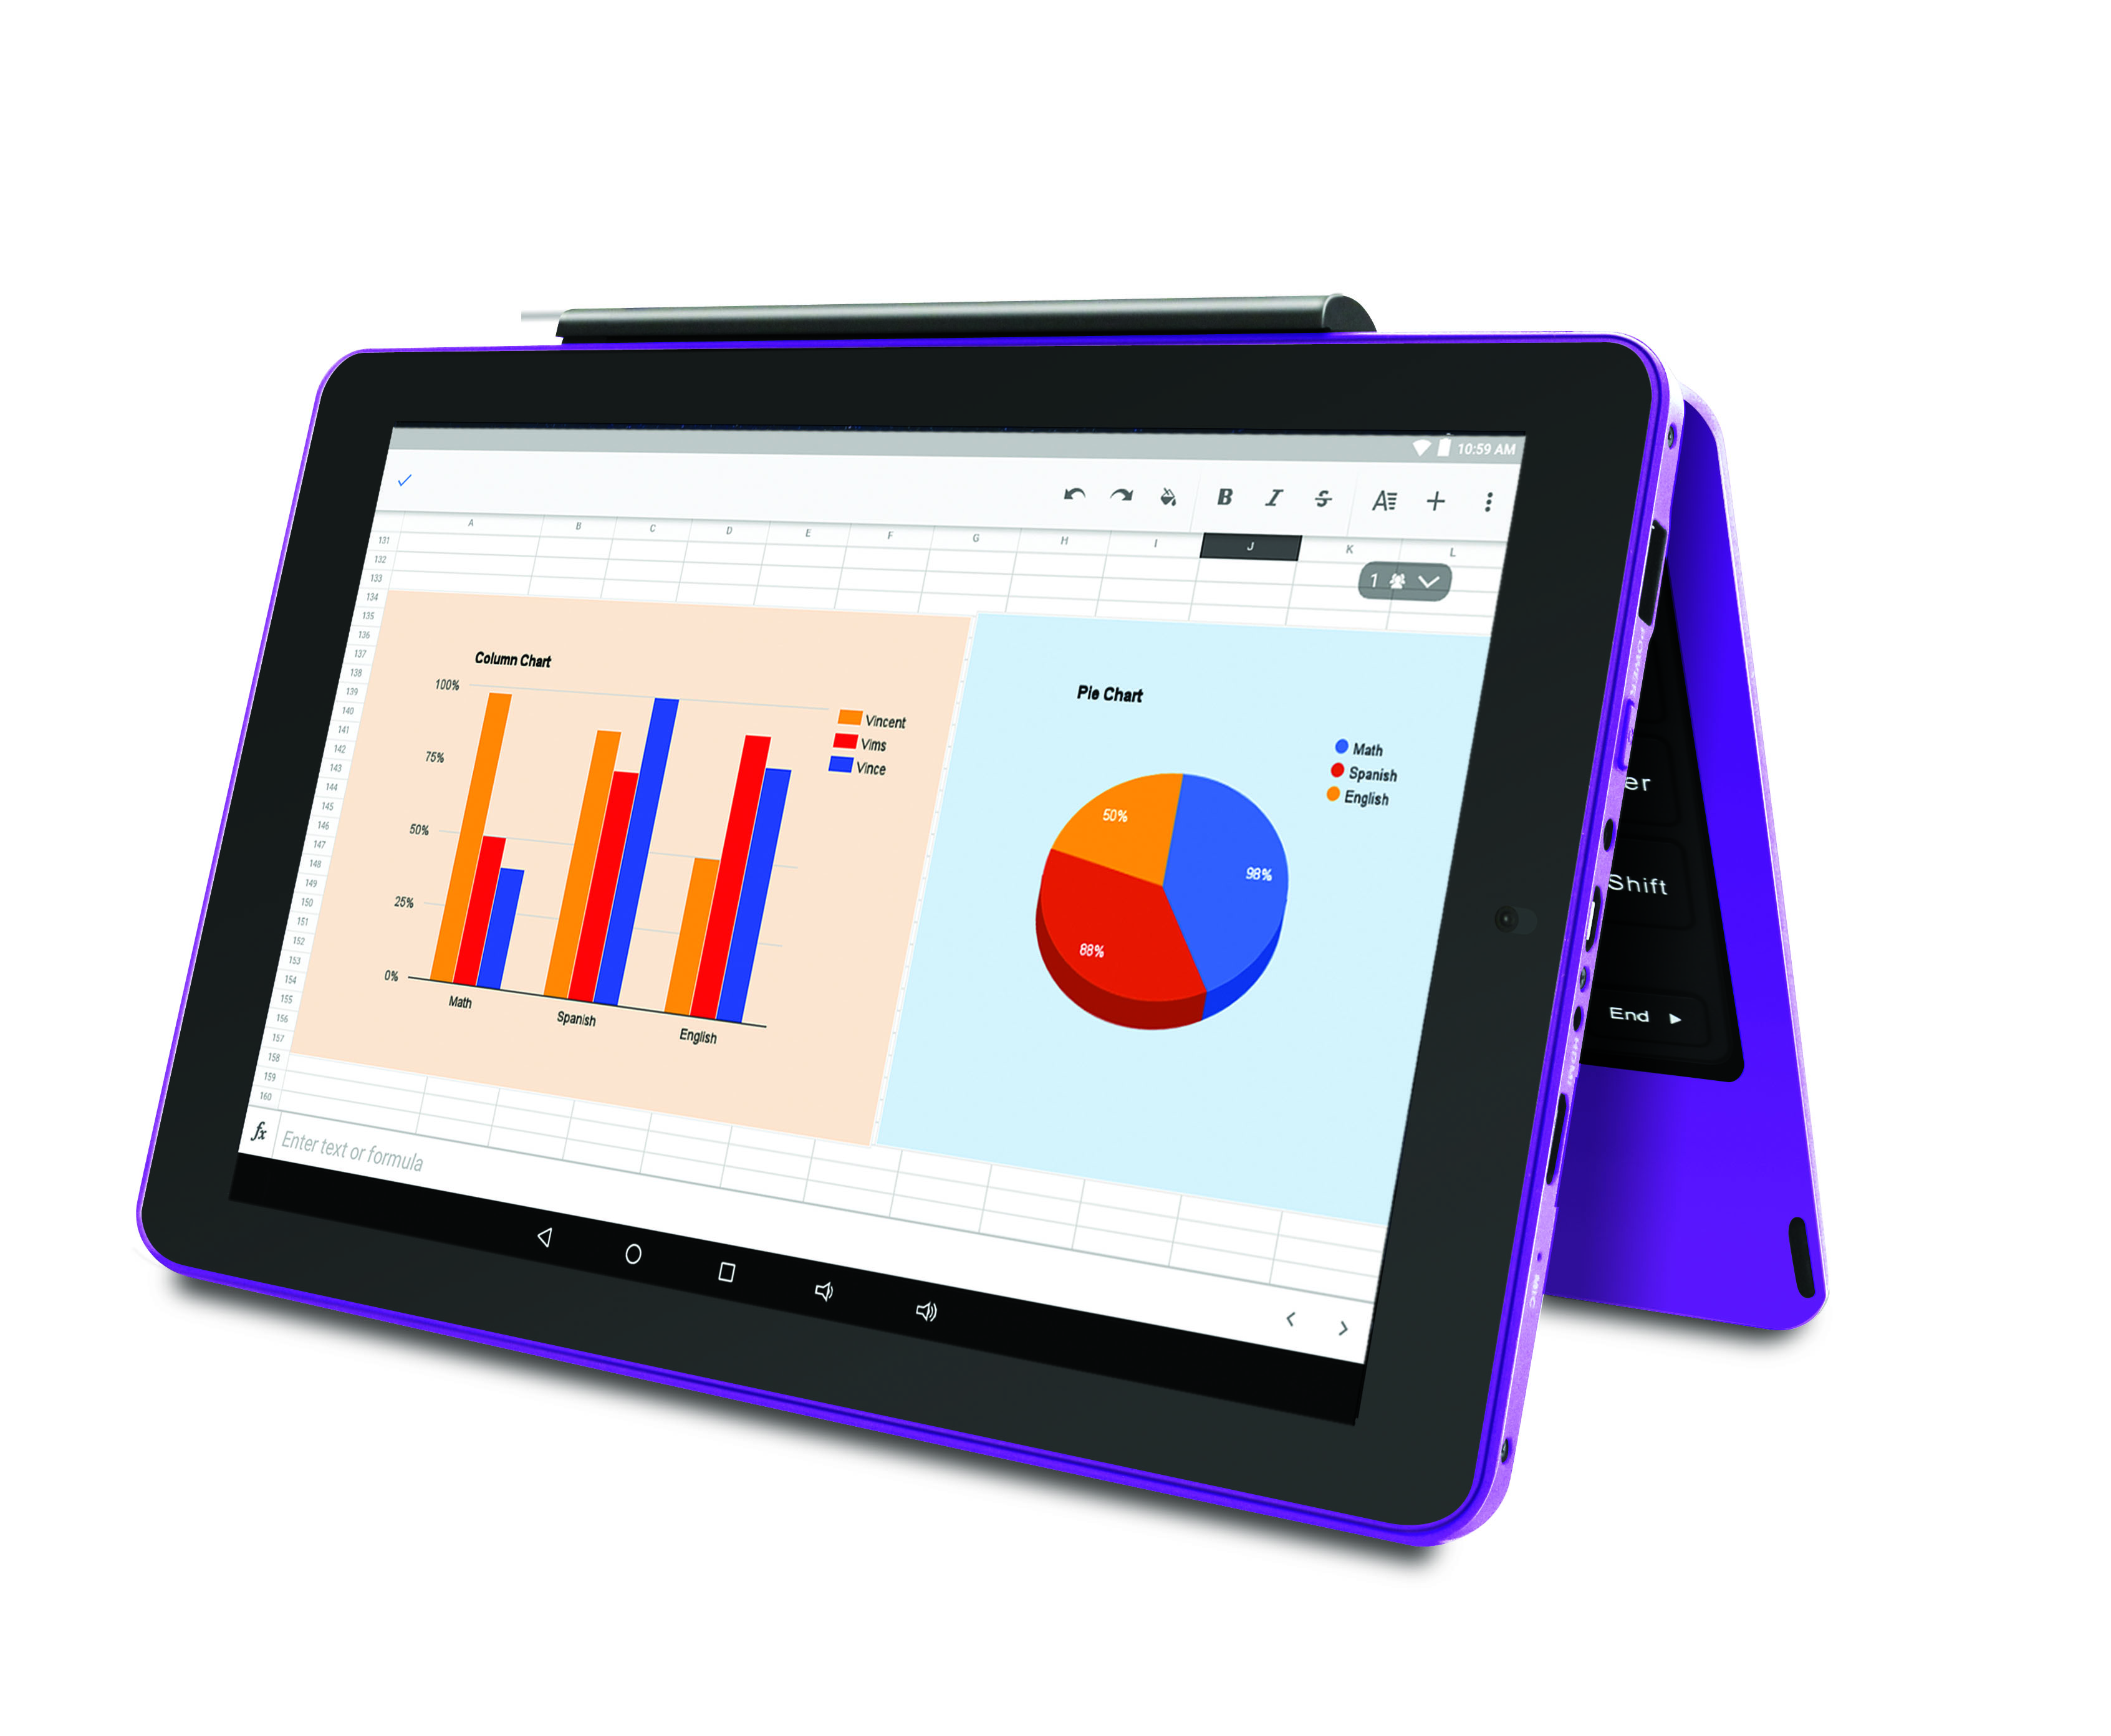 RCA Galileo Pro 11.5" 32GB 2-in-1 Tablet with Keyboard Case Android OS, Purple (Google Classroom Ready) - image 3 of 5